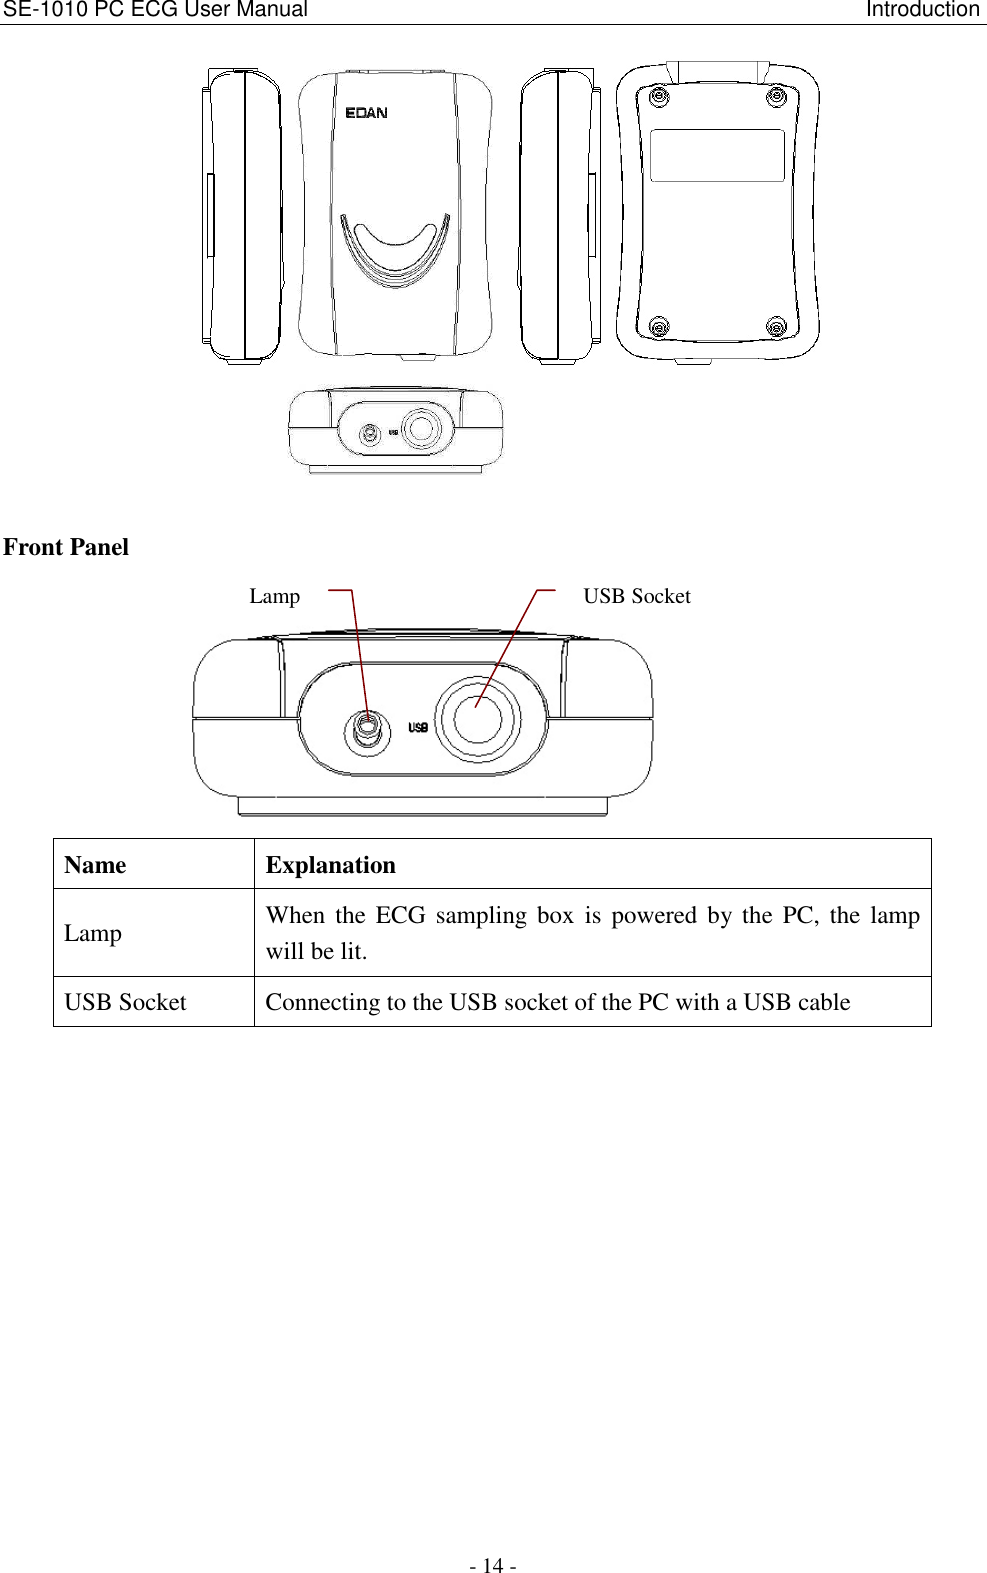 SE-1010 PC ECG User Manual                                                                                                      Introduction - 14 -          Front Panel  Name  Explanation Lamp  When  the  ECG  sampling box is  powered by the  PC,  the  lamp will be lit. USB Socket  Connecting to the USB socket of the PC with a USB cable Lamp USB Socket 